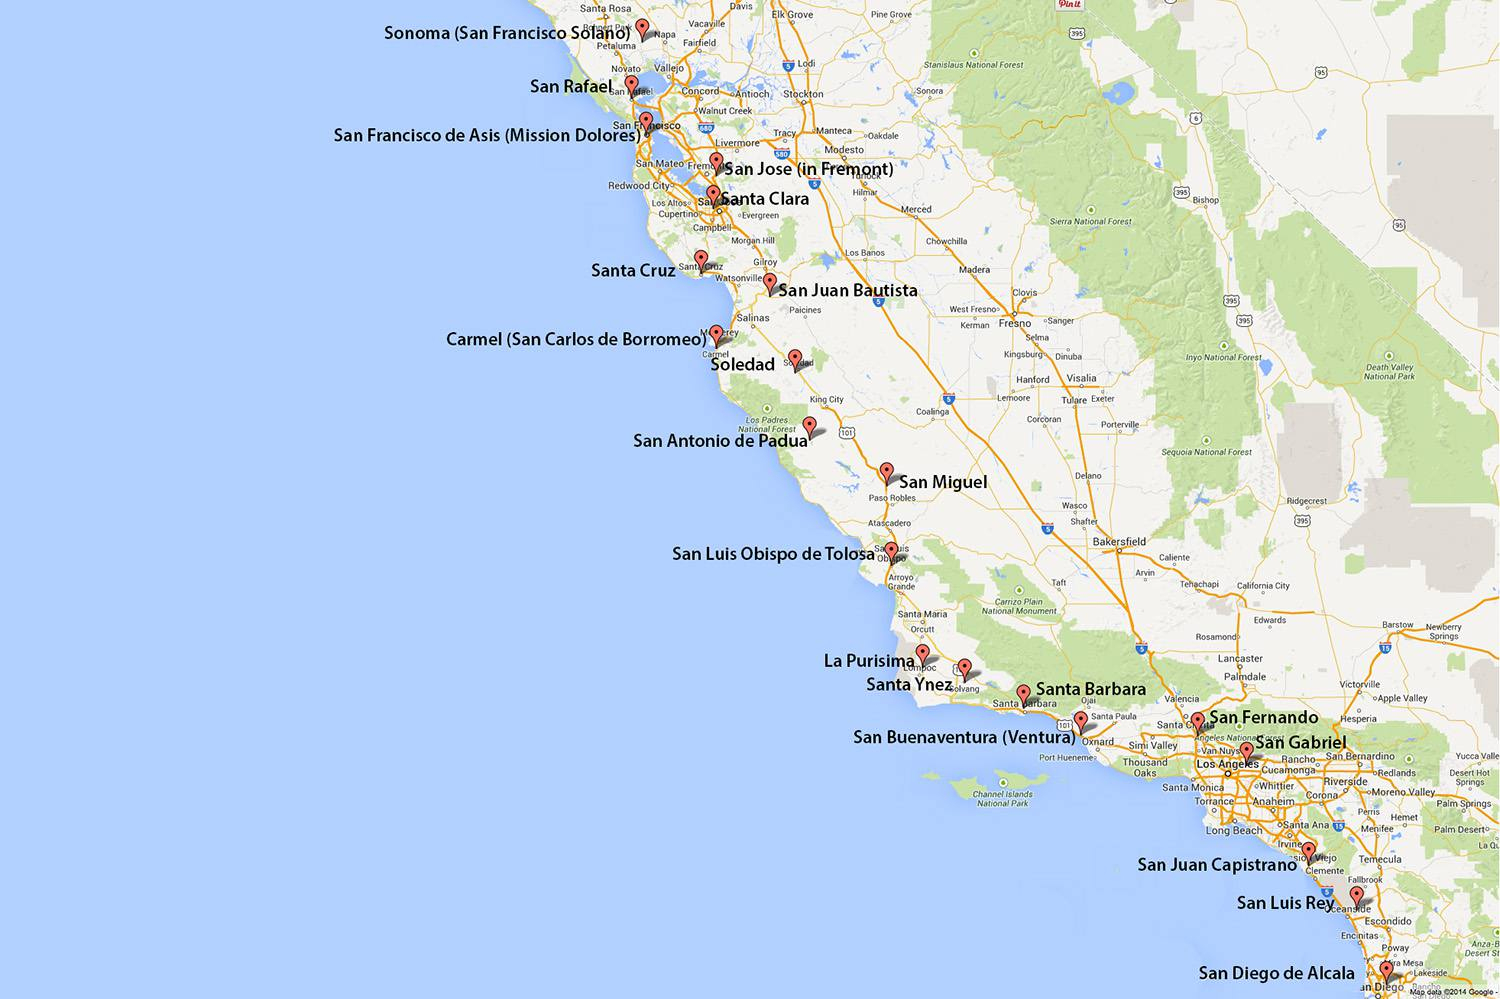 Maps Of California - Created For Visitors And Travelers - California Vacation Planning Map